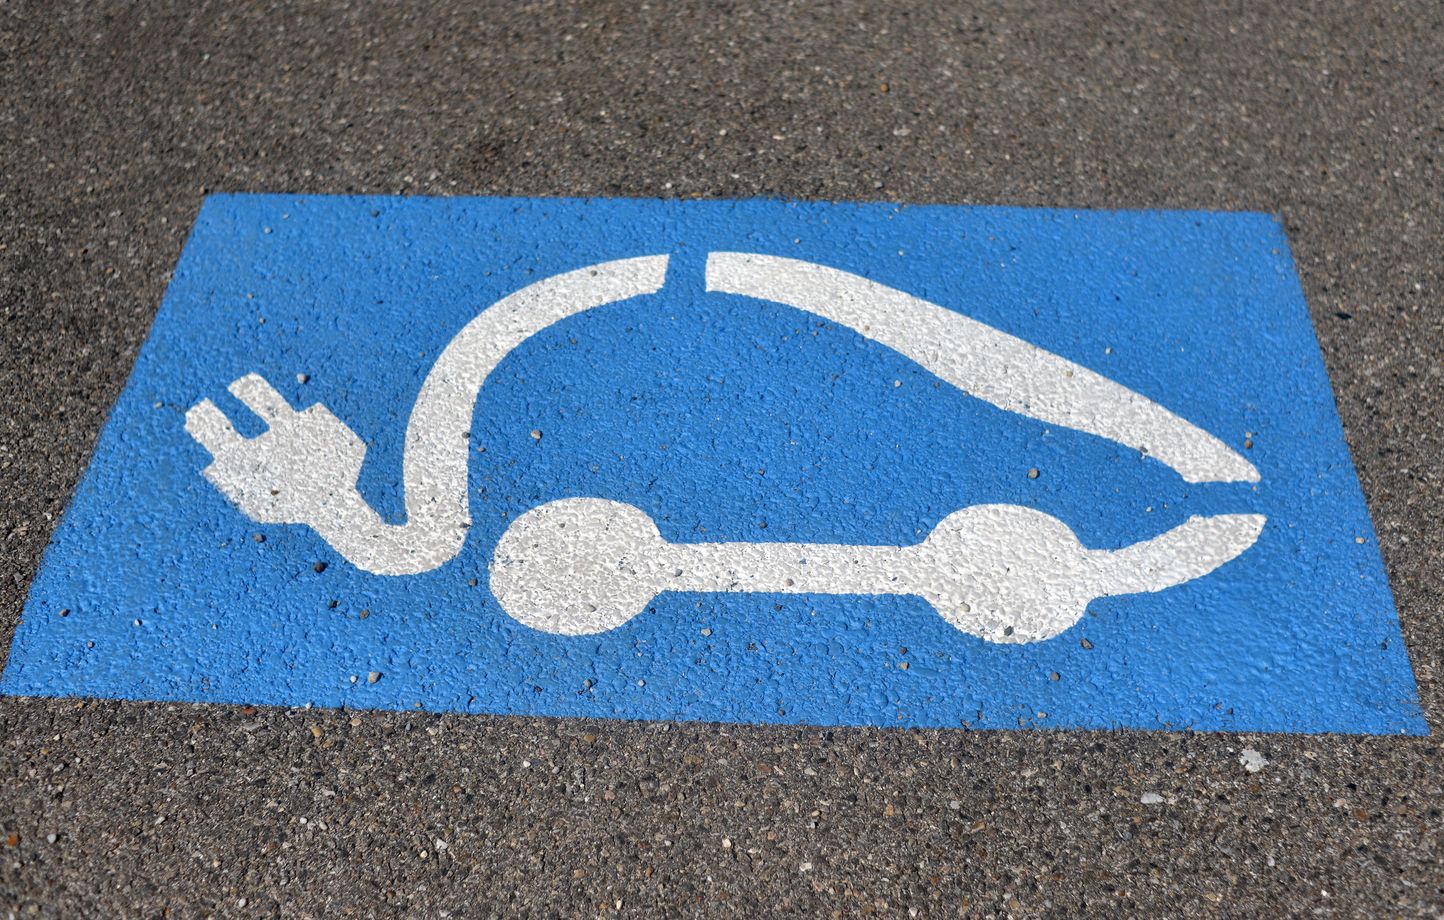 No, a study has not proven that electric cars pollute 1,850 times more than gasoline vehicles